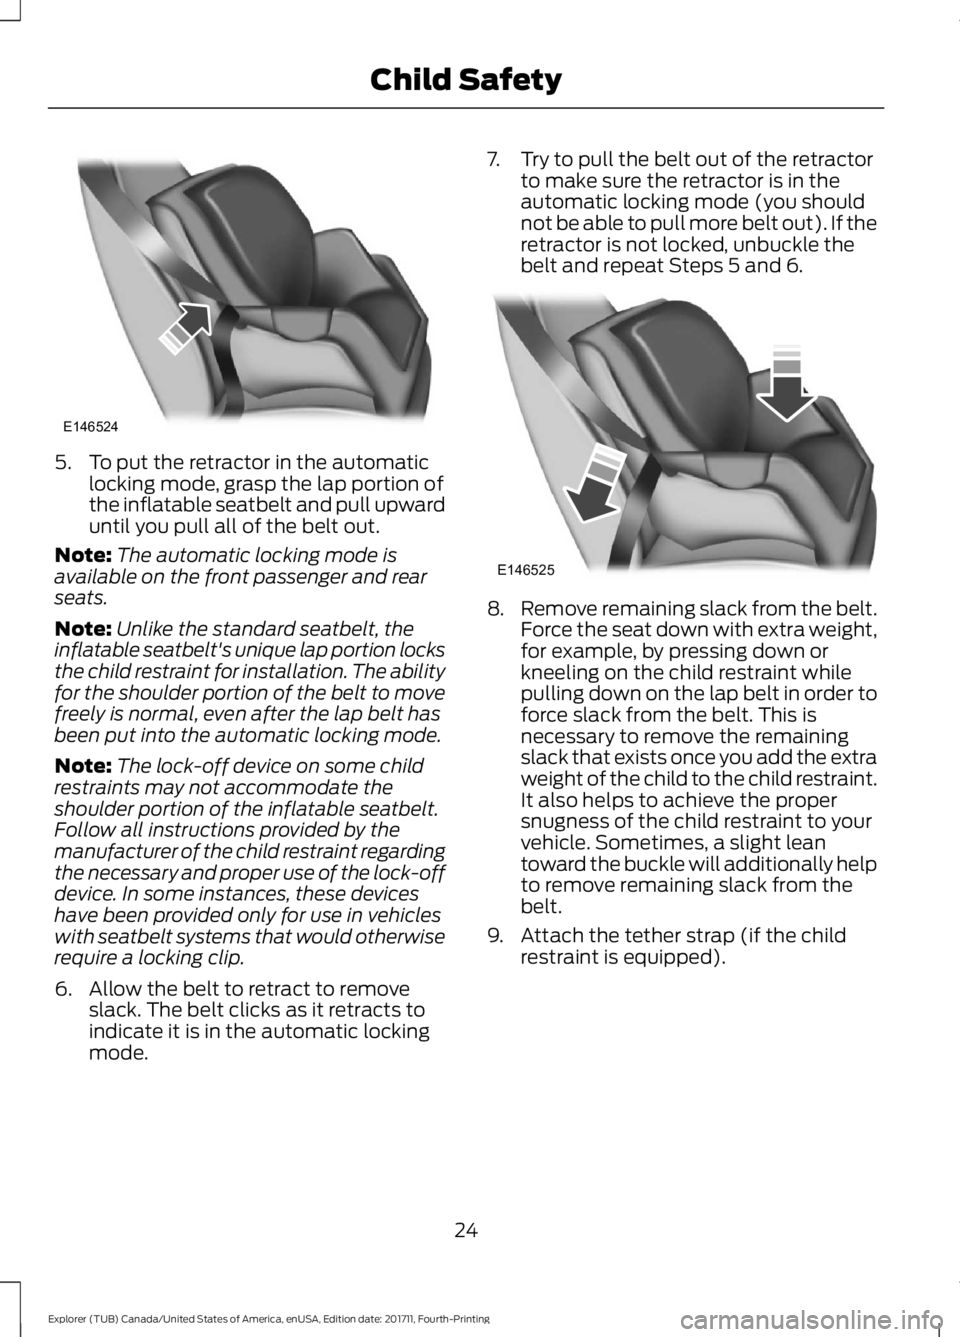 FORD EXPLORER 2018  Owners Manual 5. To put the retractor in the automatic
locking mode, grasp the lap portion of
the inflatable seatbelt and pull upward
until you pull all of the belt out.
Note: The automatic locking mode is
availabl